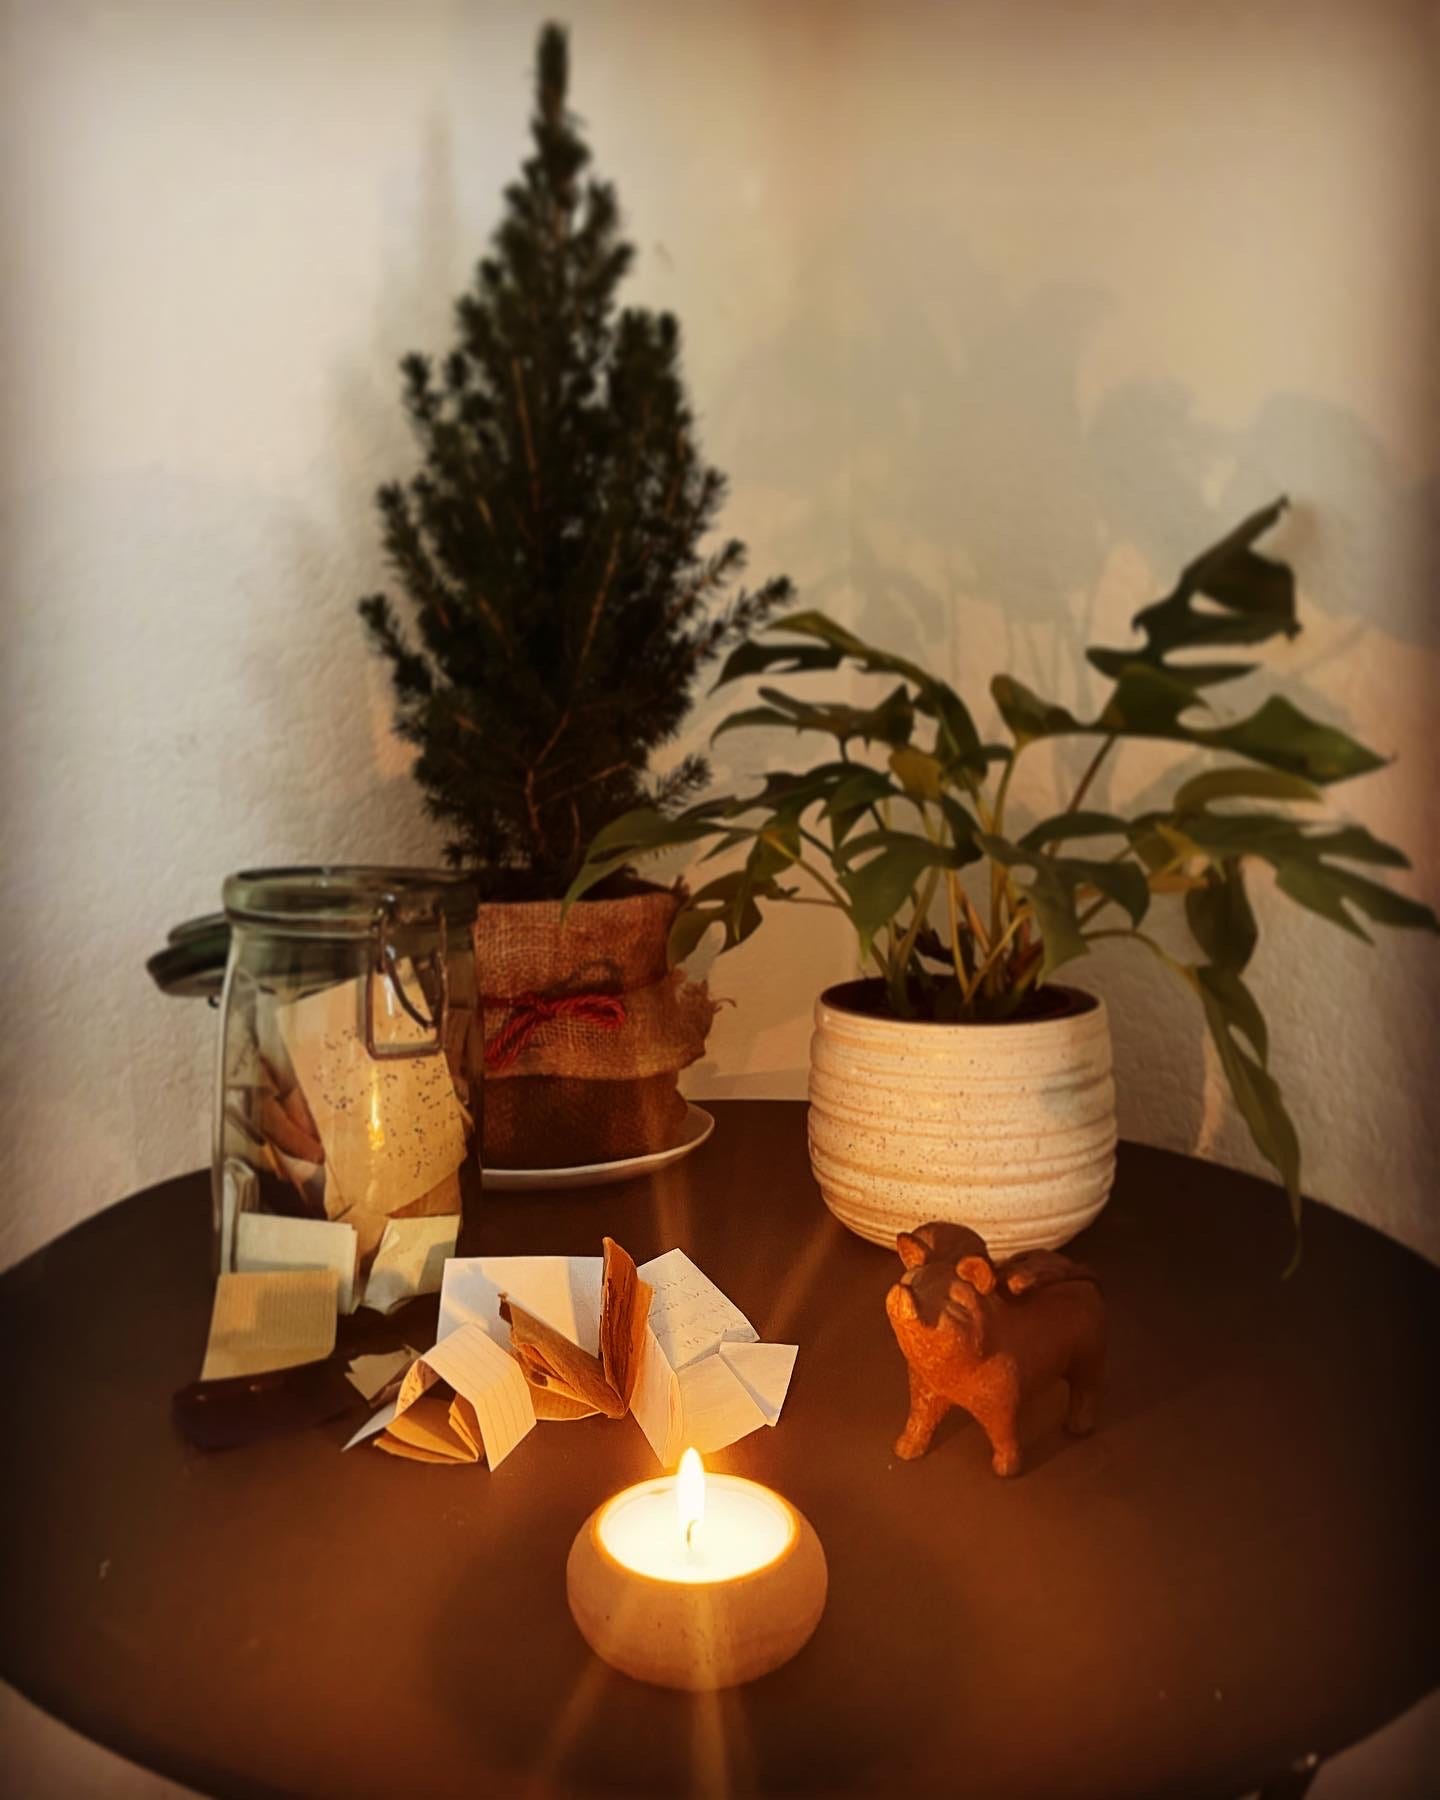 A tiny fir tree, a small cheese plant, an ornamental pig and a glass jar filled with scraps of paper with writing on them, lit by a small candle.